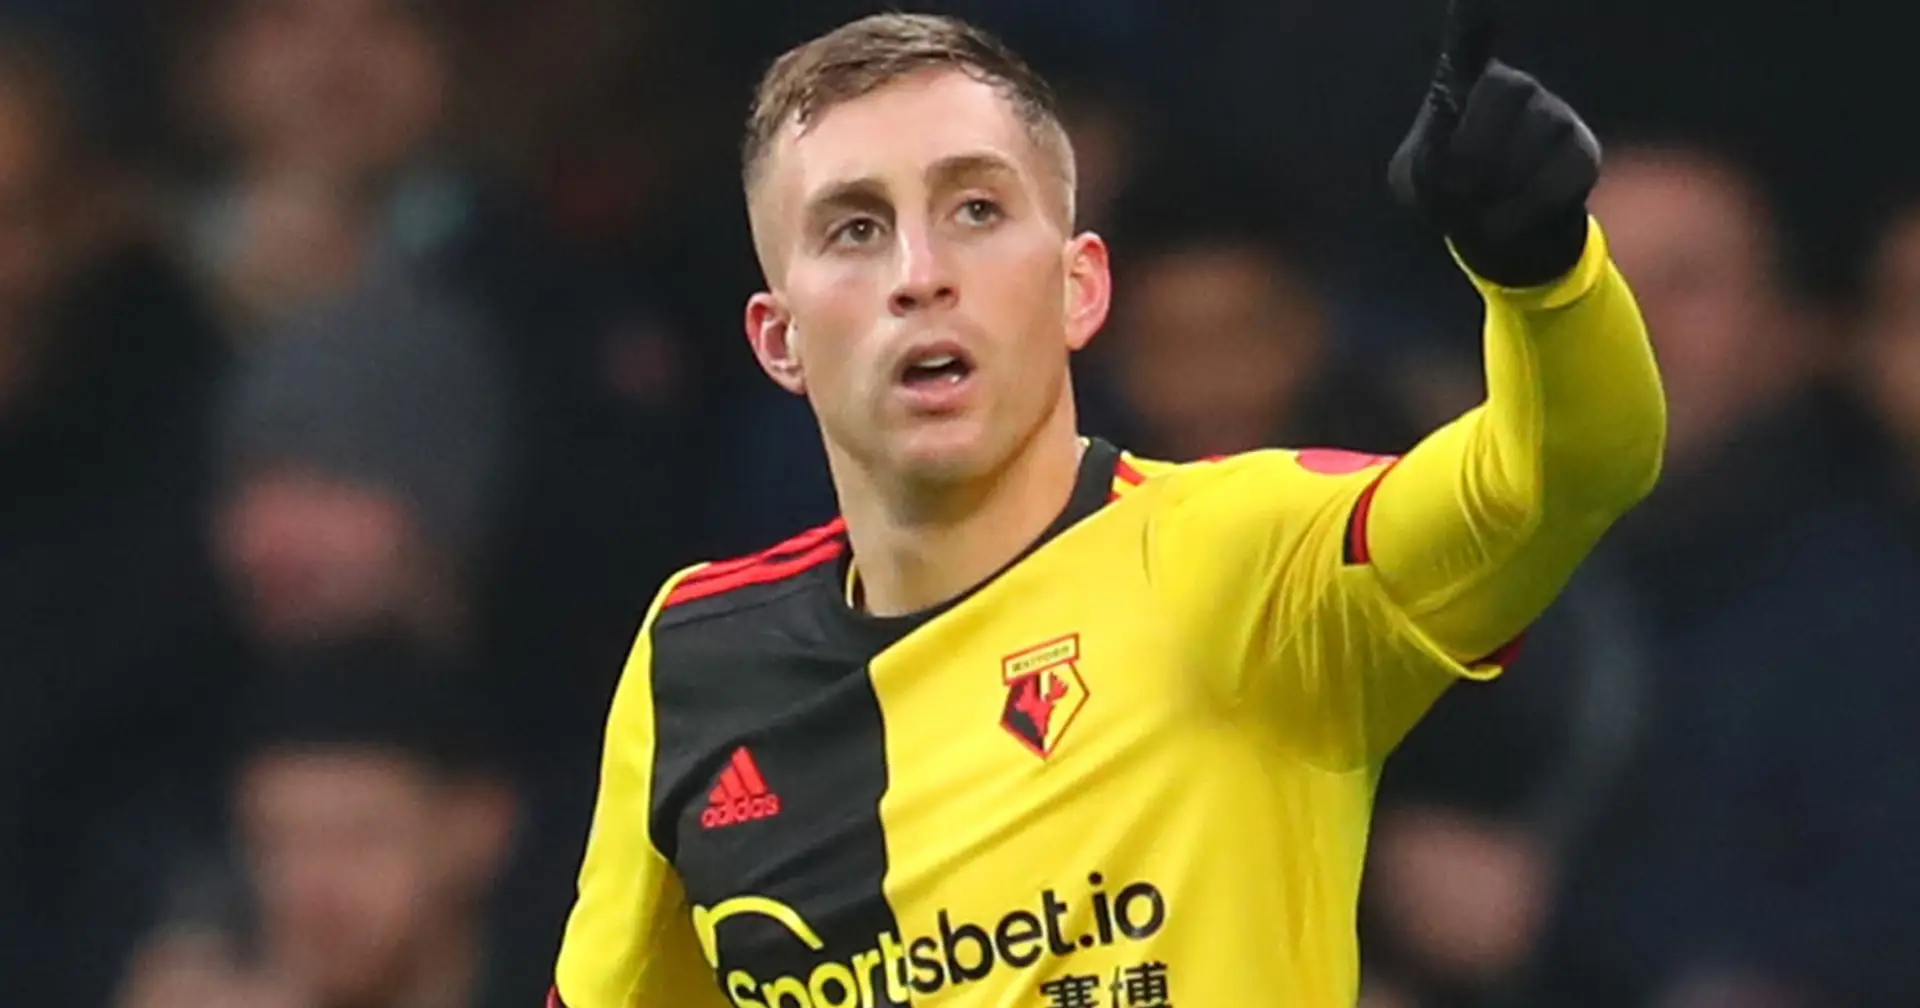 'When you're young at Barca there are a lot of eyes on you': Gerard Deulofeu admits to pressure at Camp Nou